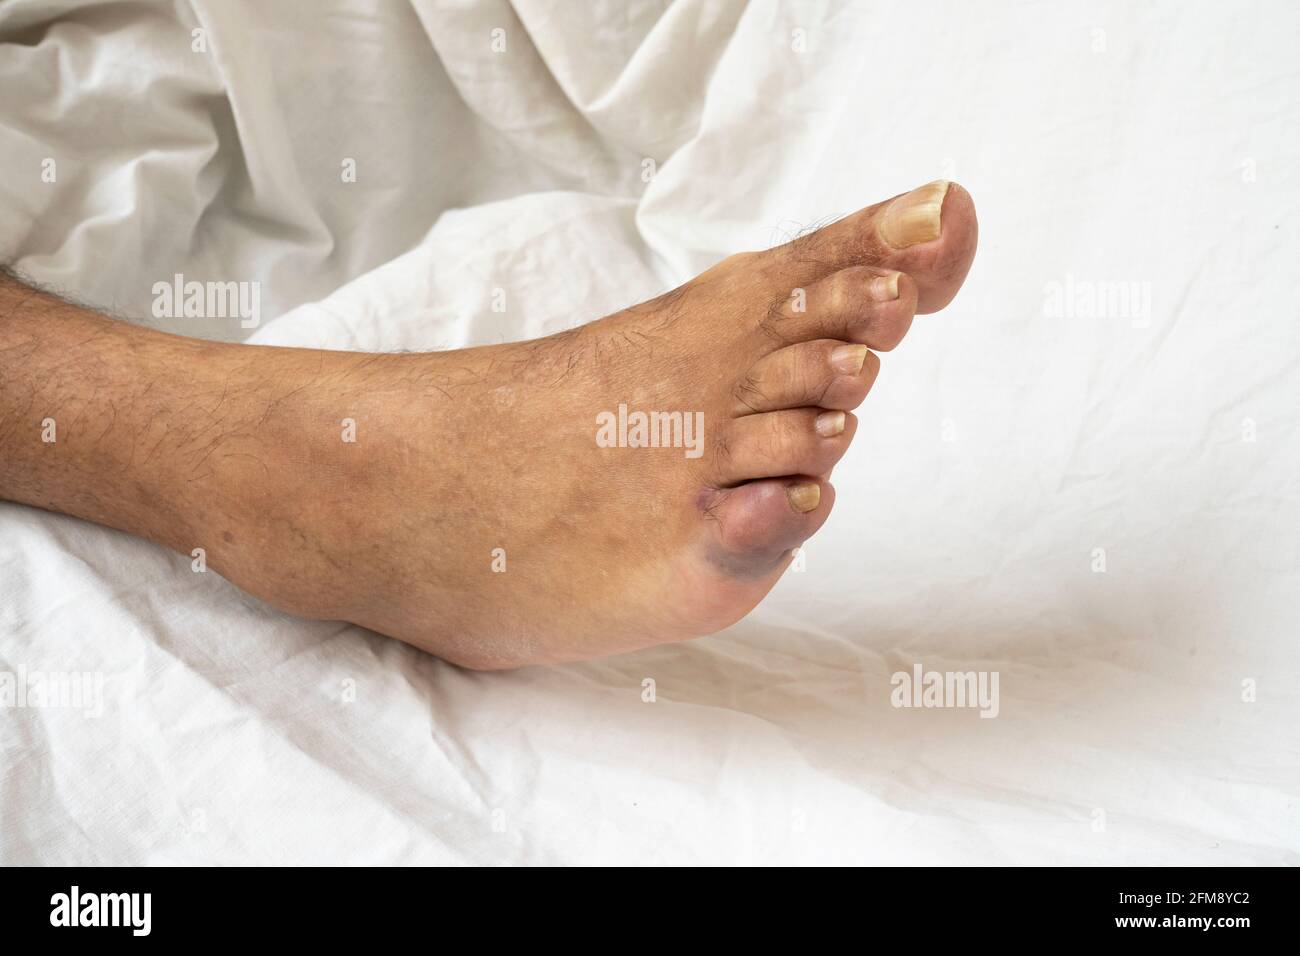 Bruising little foot toe. Close up on the broken little toe of a senior man showing discoloration. Stock Photo